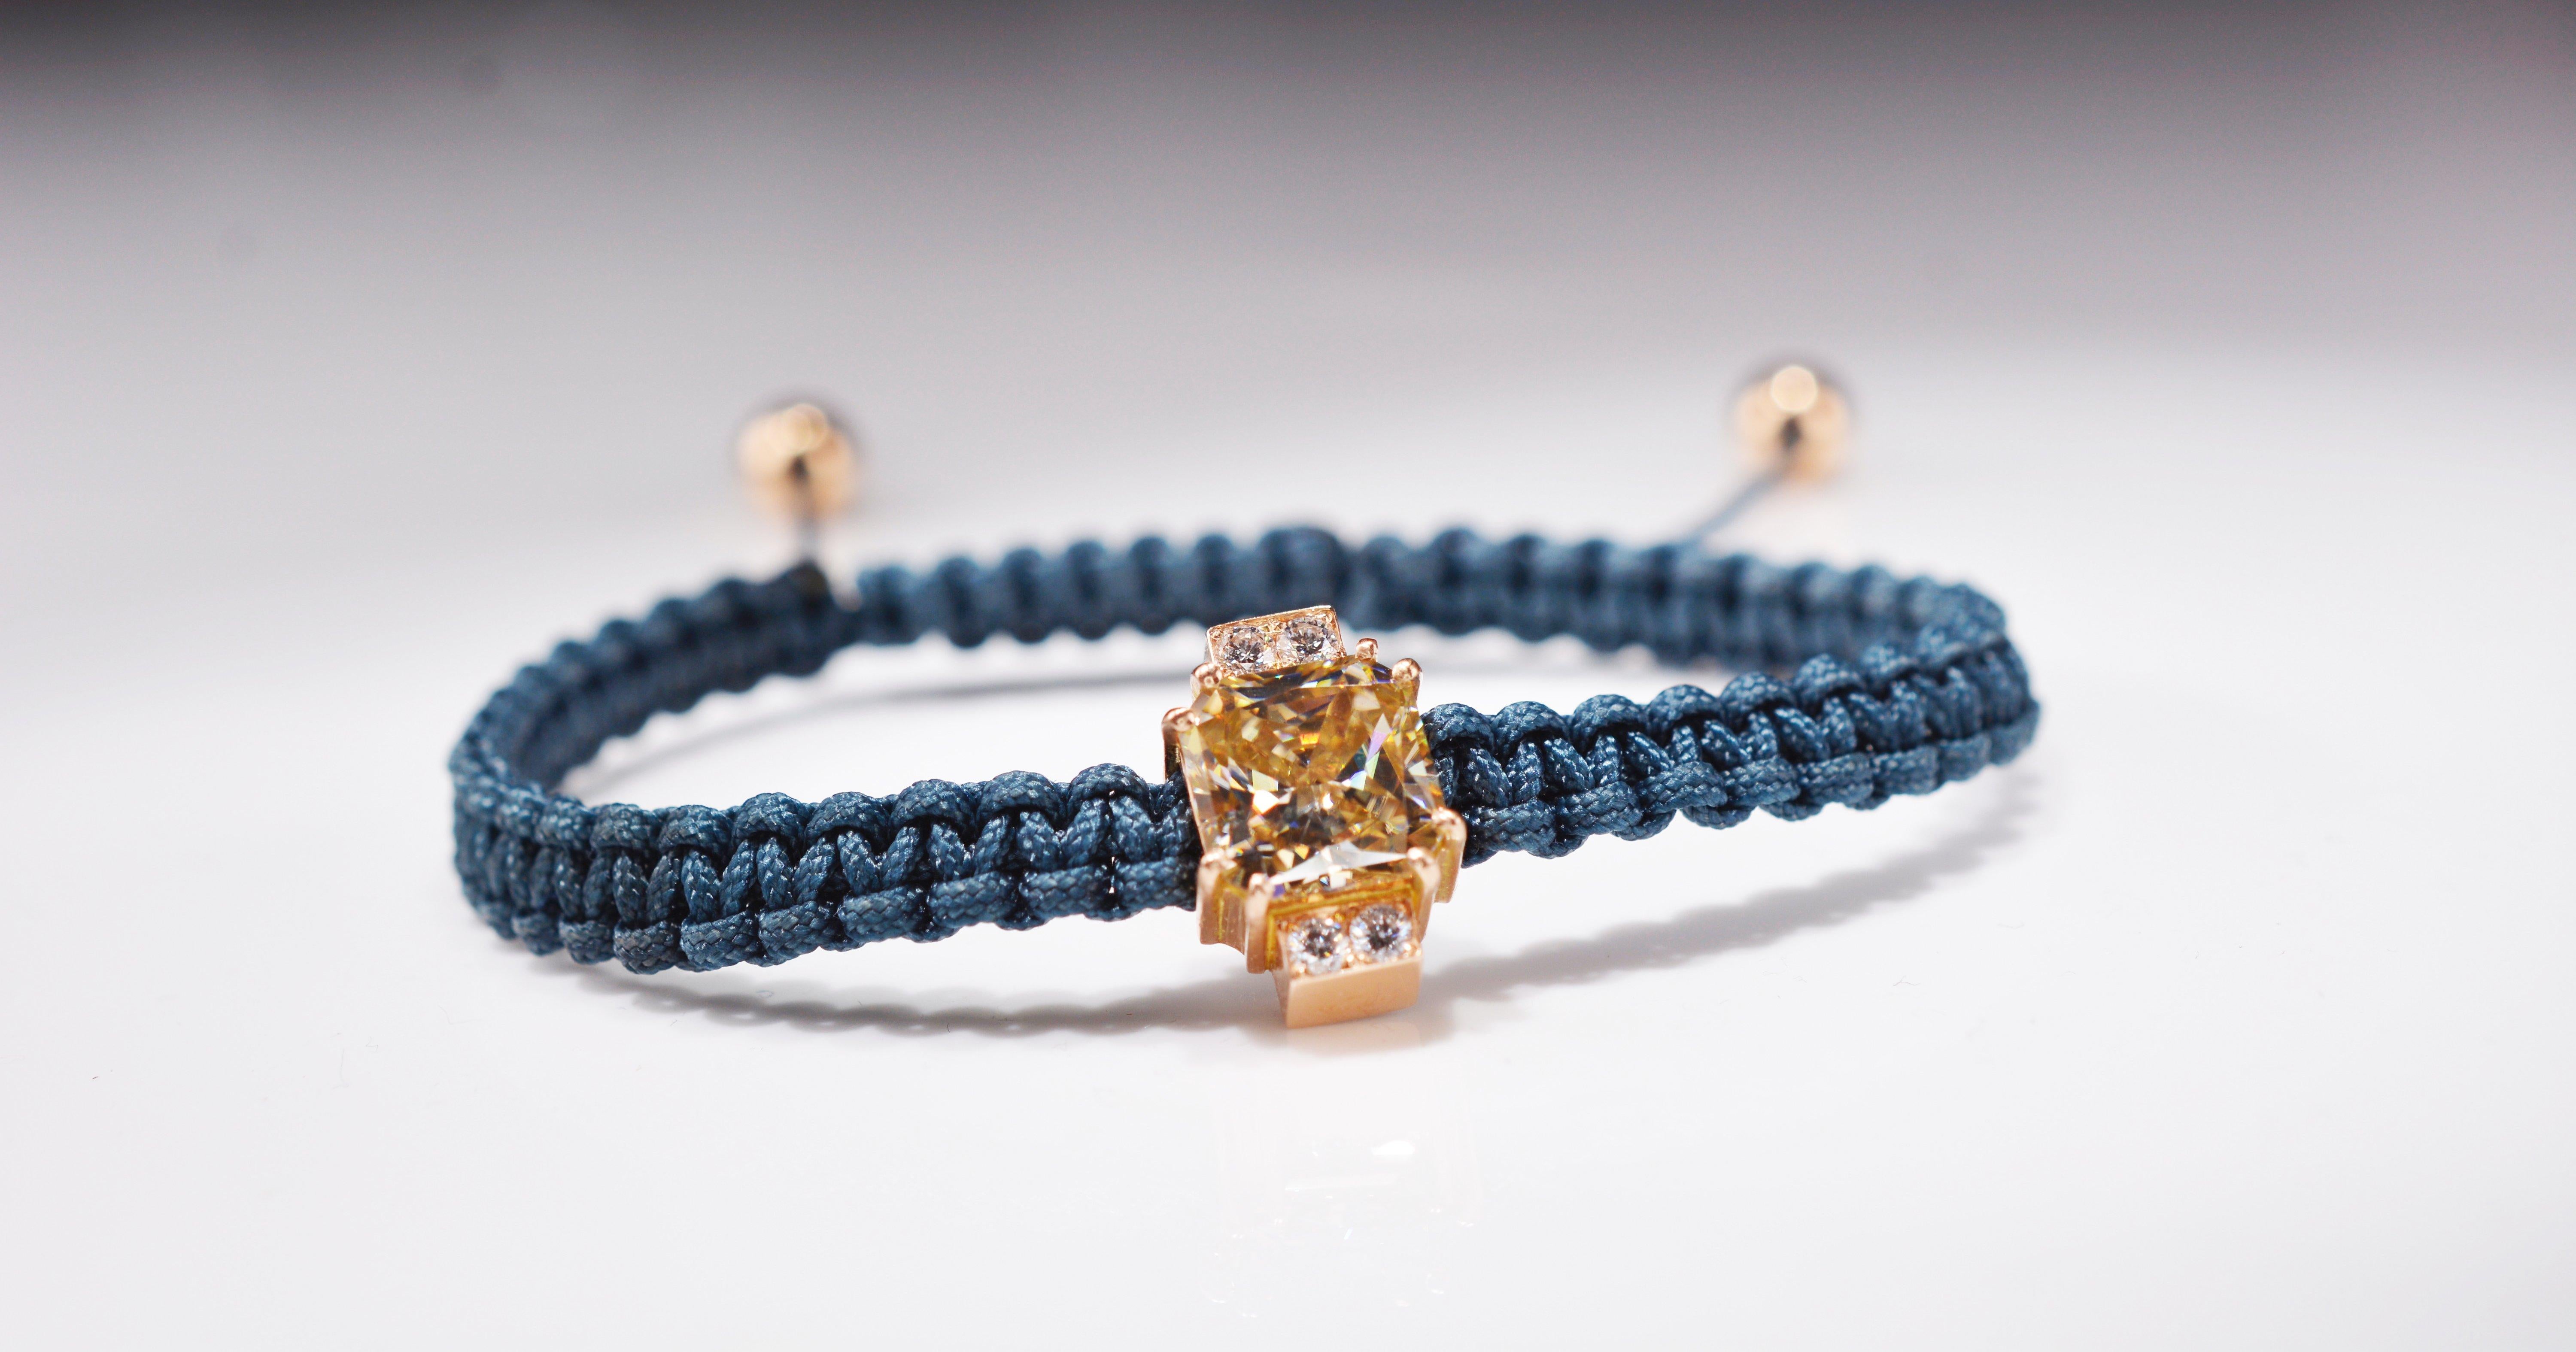 Contemporary unisex macramé bracelet, featuring a 2.92 carat Radiant cut fancy light yellow Moissanite center stone set in 18 karat rosé gold accompanied by 0.24 carat (4 x 0.06ct) F/VS round diamonds.
The ends on the bracelet are also made out of